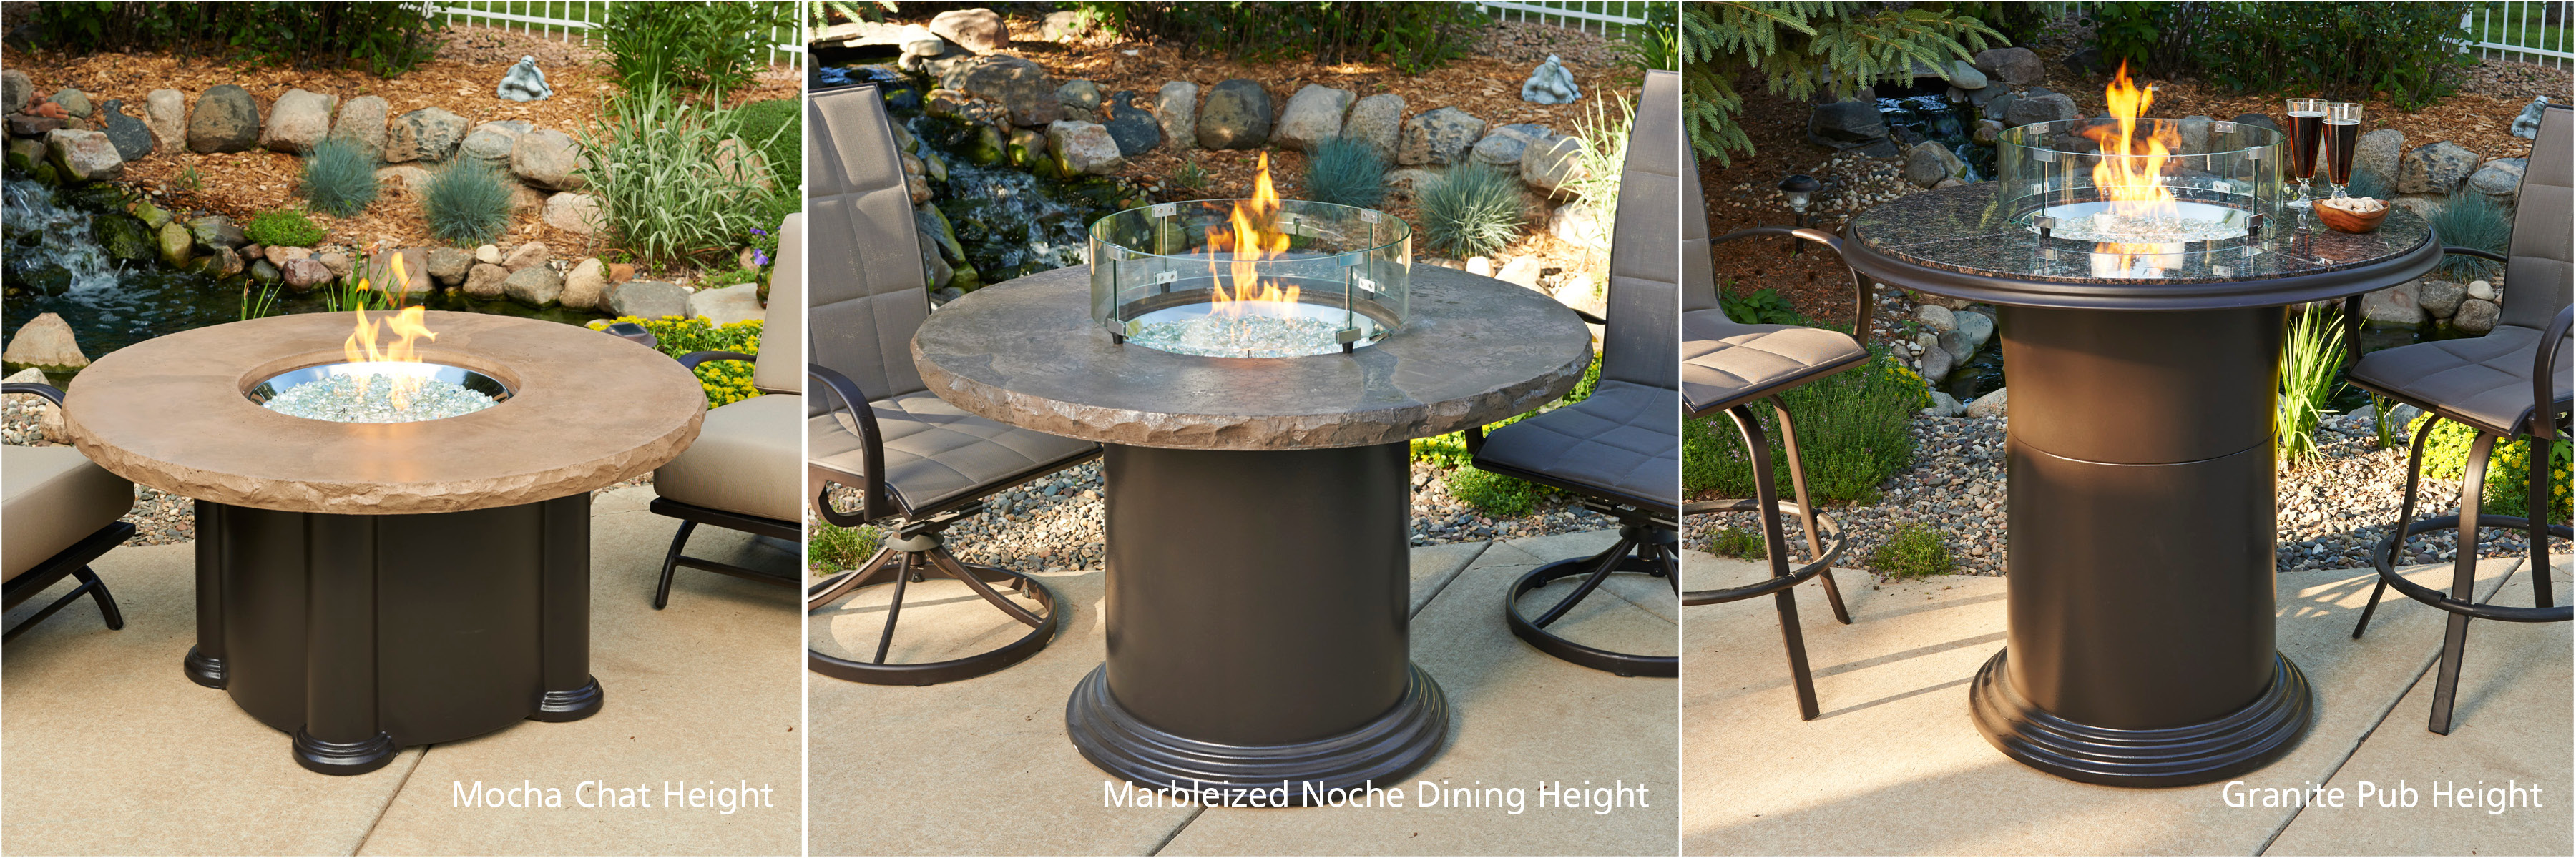 Update Colonial Collection Fire Pit Tables, Tall Fire Pit Table With Chairs